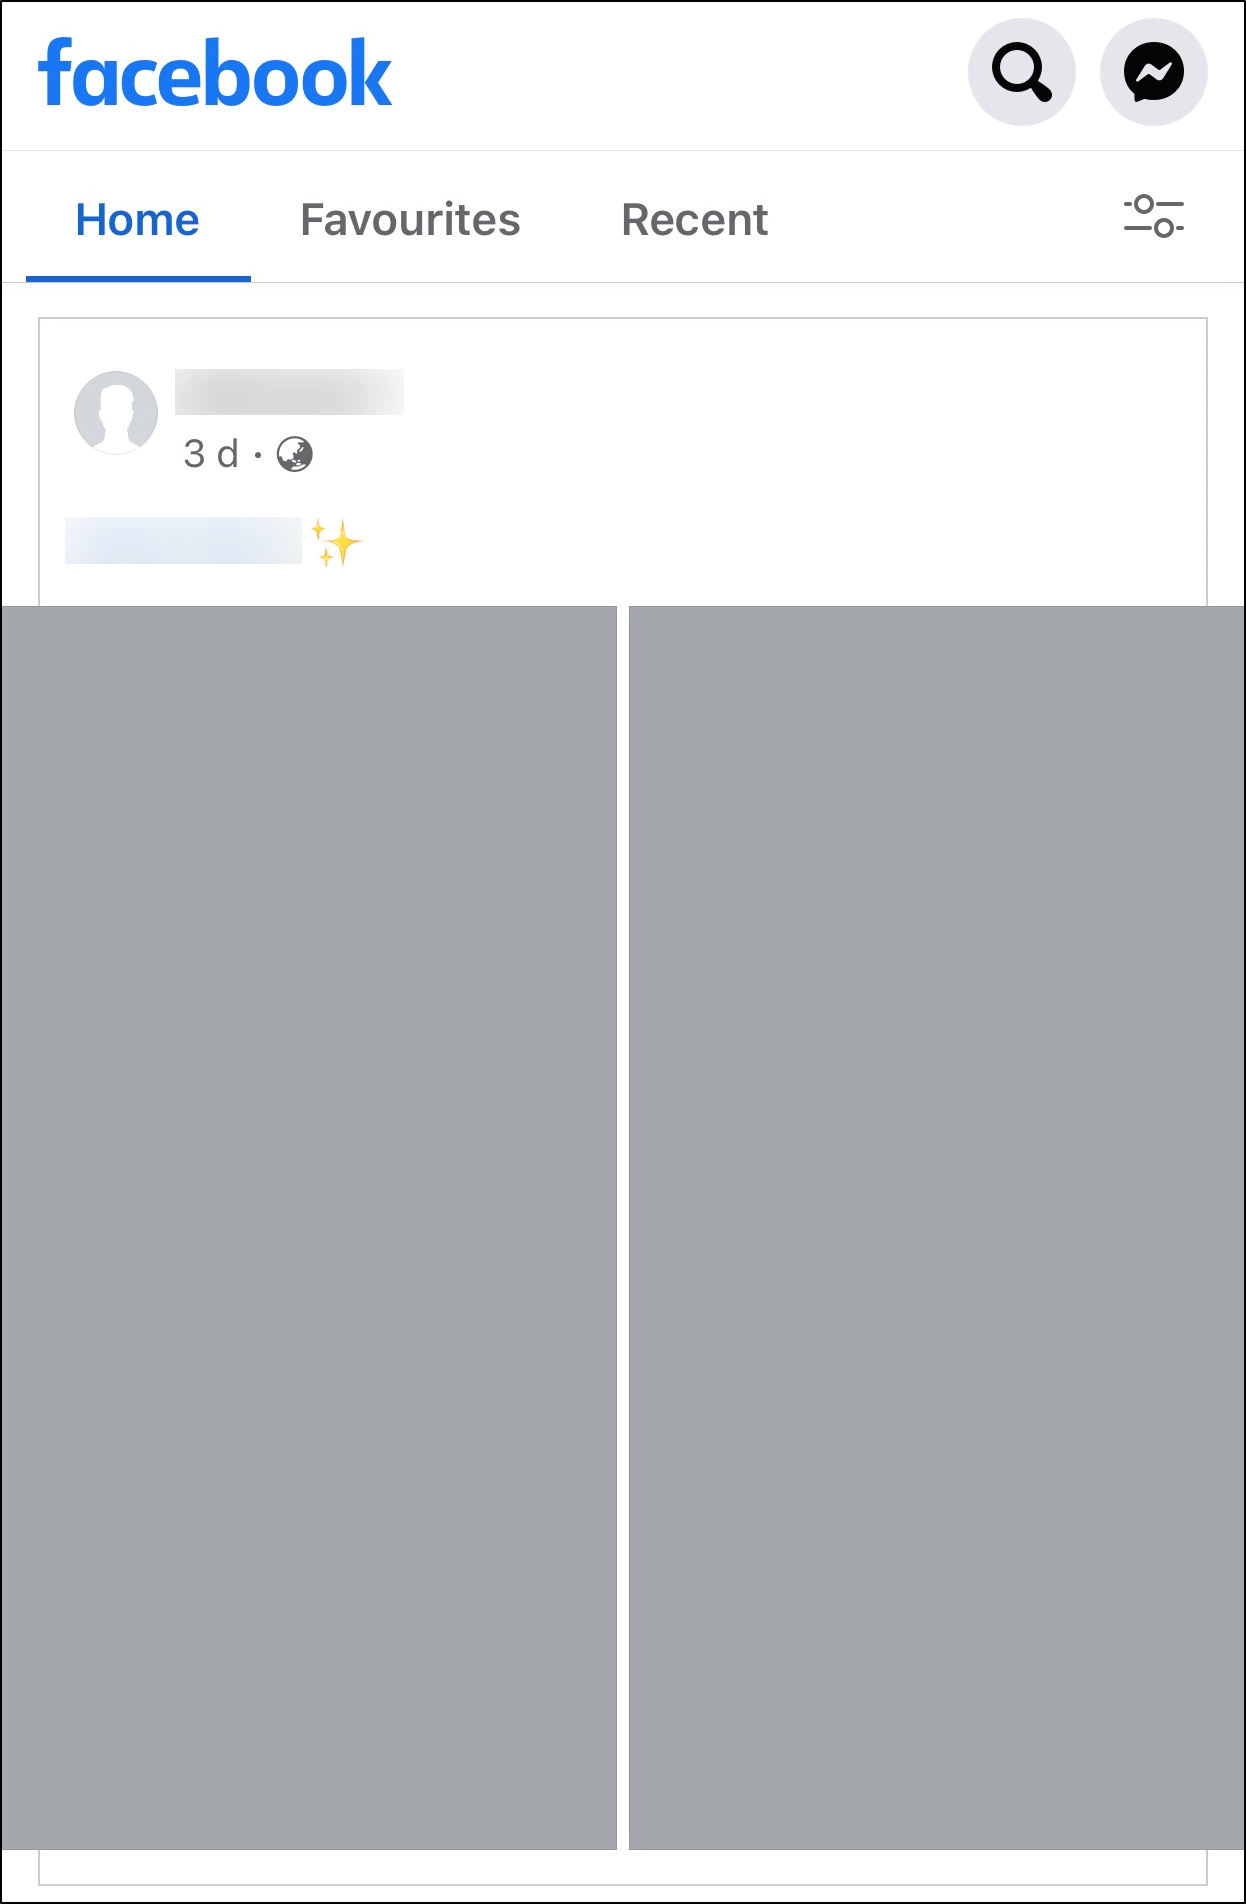 Facebook pictures, images, photos on newsfeed blank, grey, black image or not loading or showing